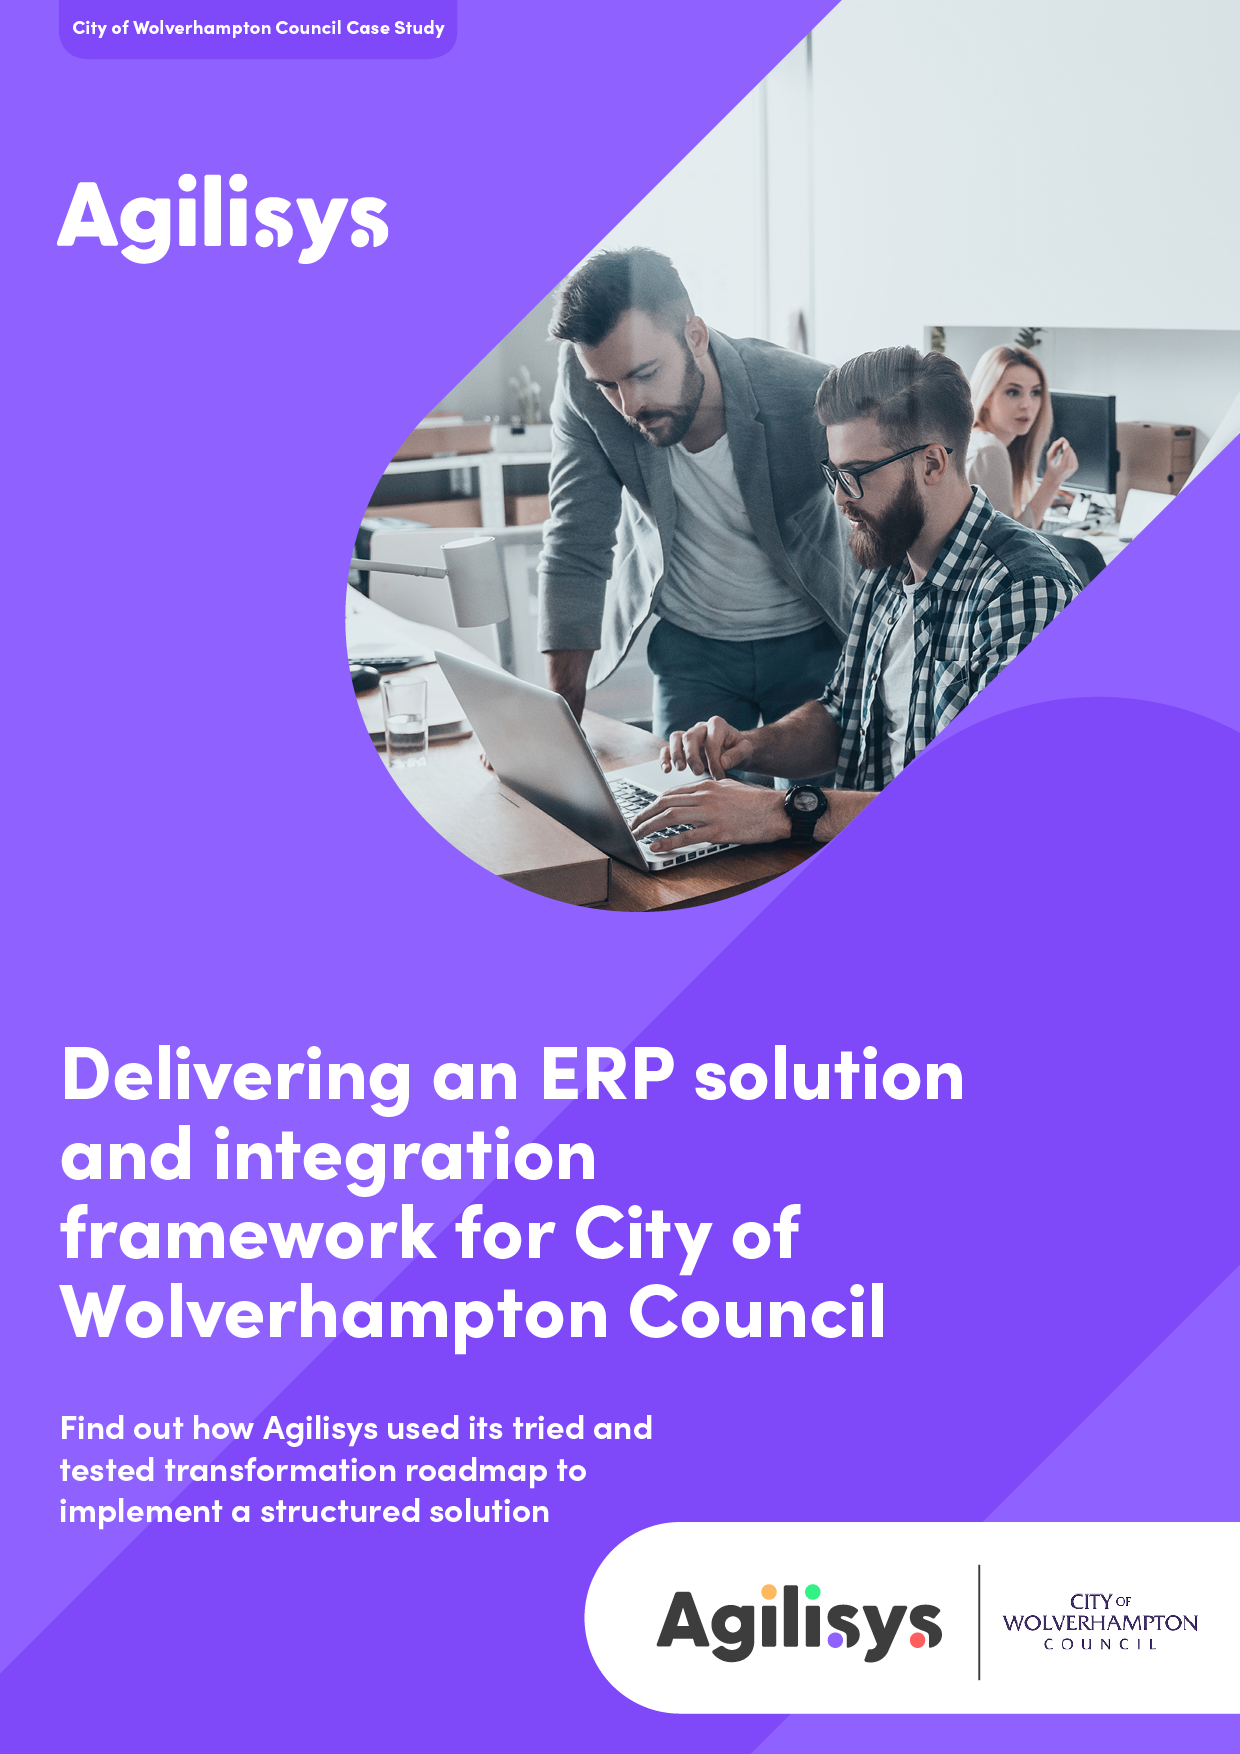 Delivering an ERP solution and integration framework for City of Wolverhampton Council